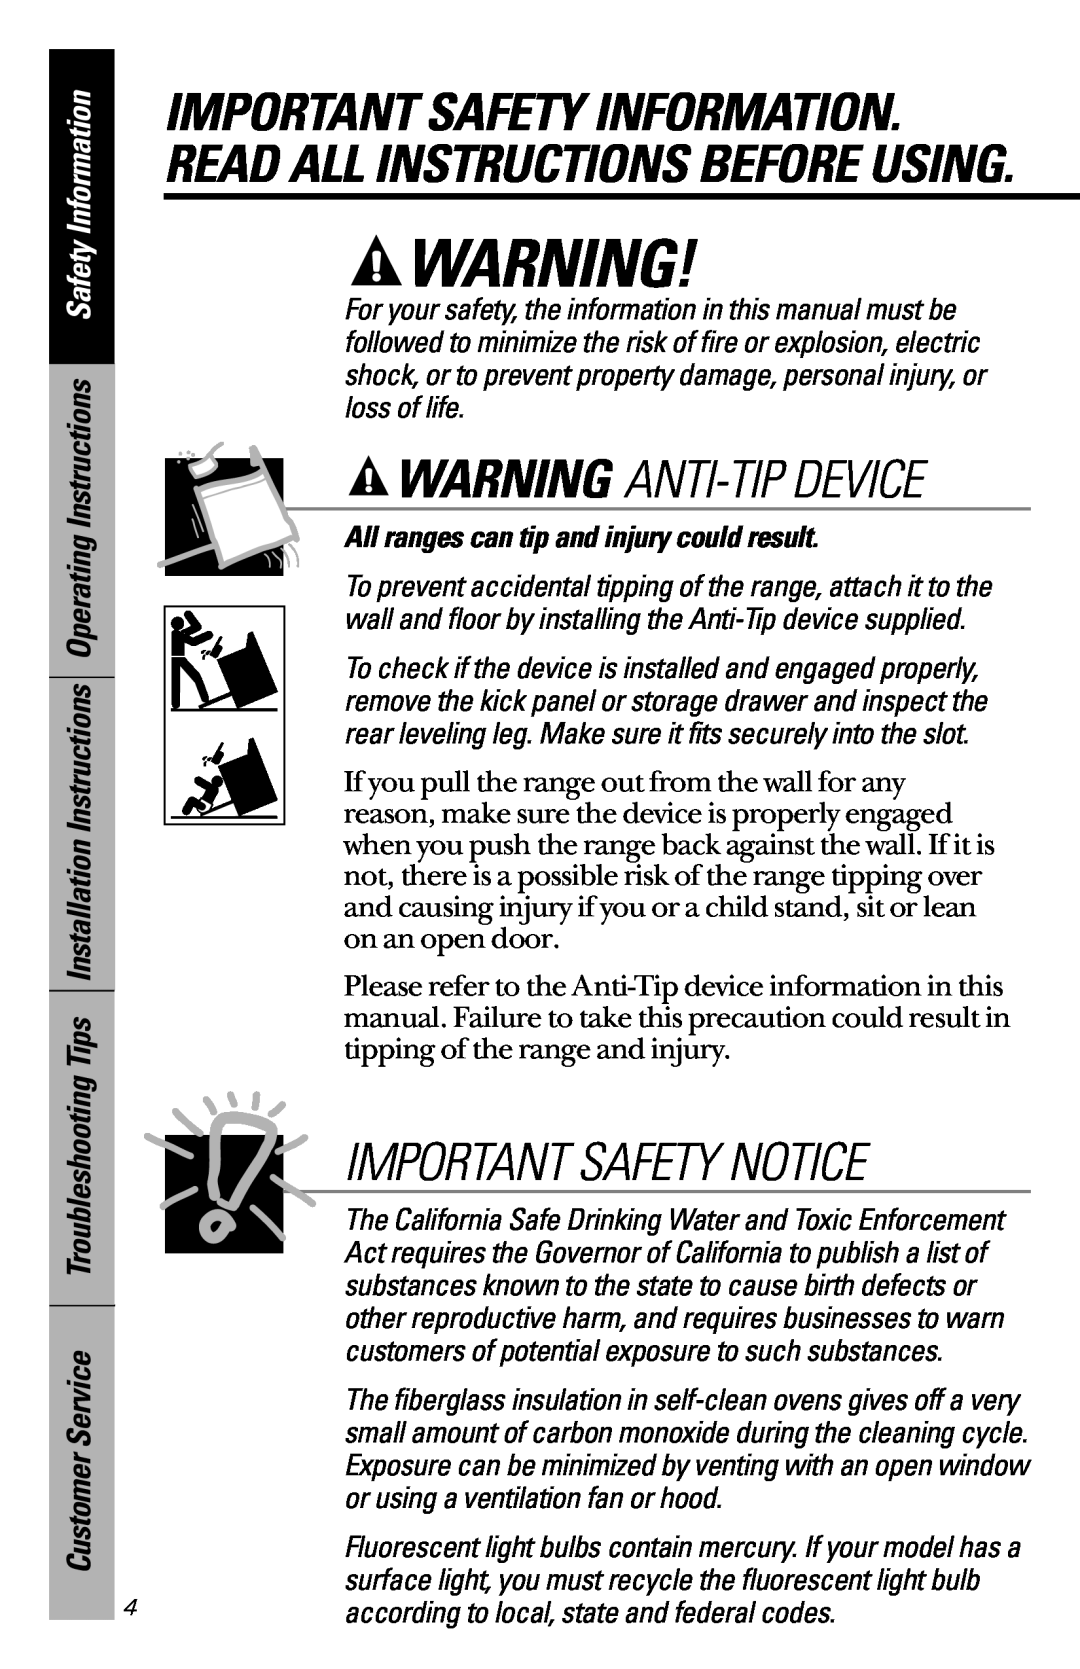 GE JBP47, JBP46, JBP45 Warning Anti-Tip Device, Important Safety Notice, All ranges can tip and injury could result 